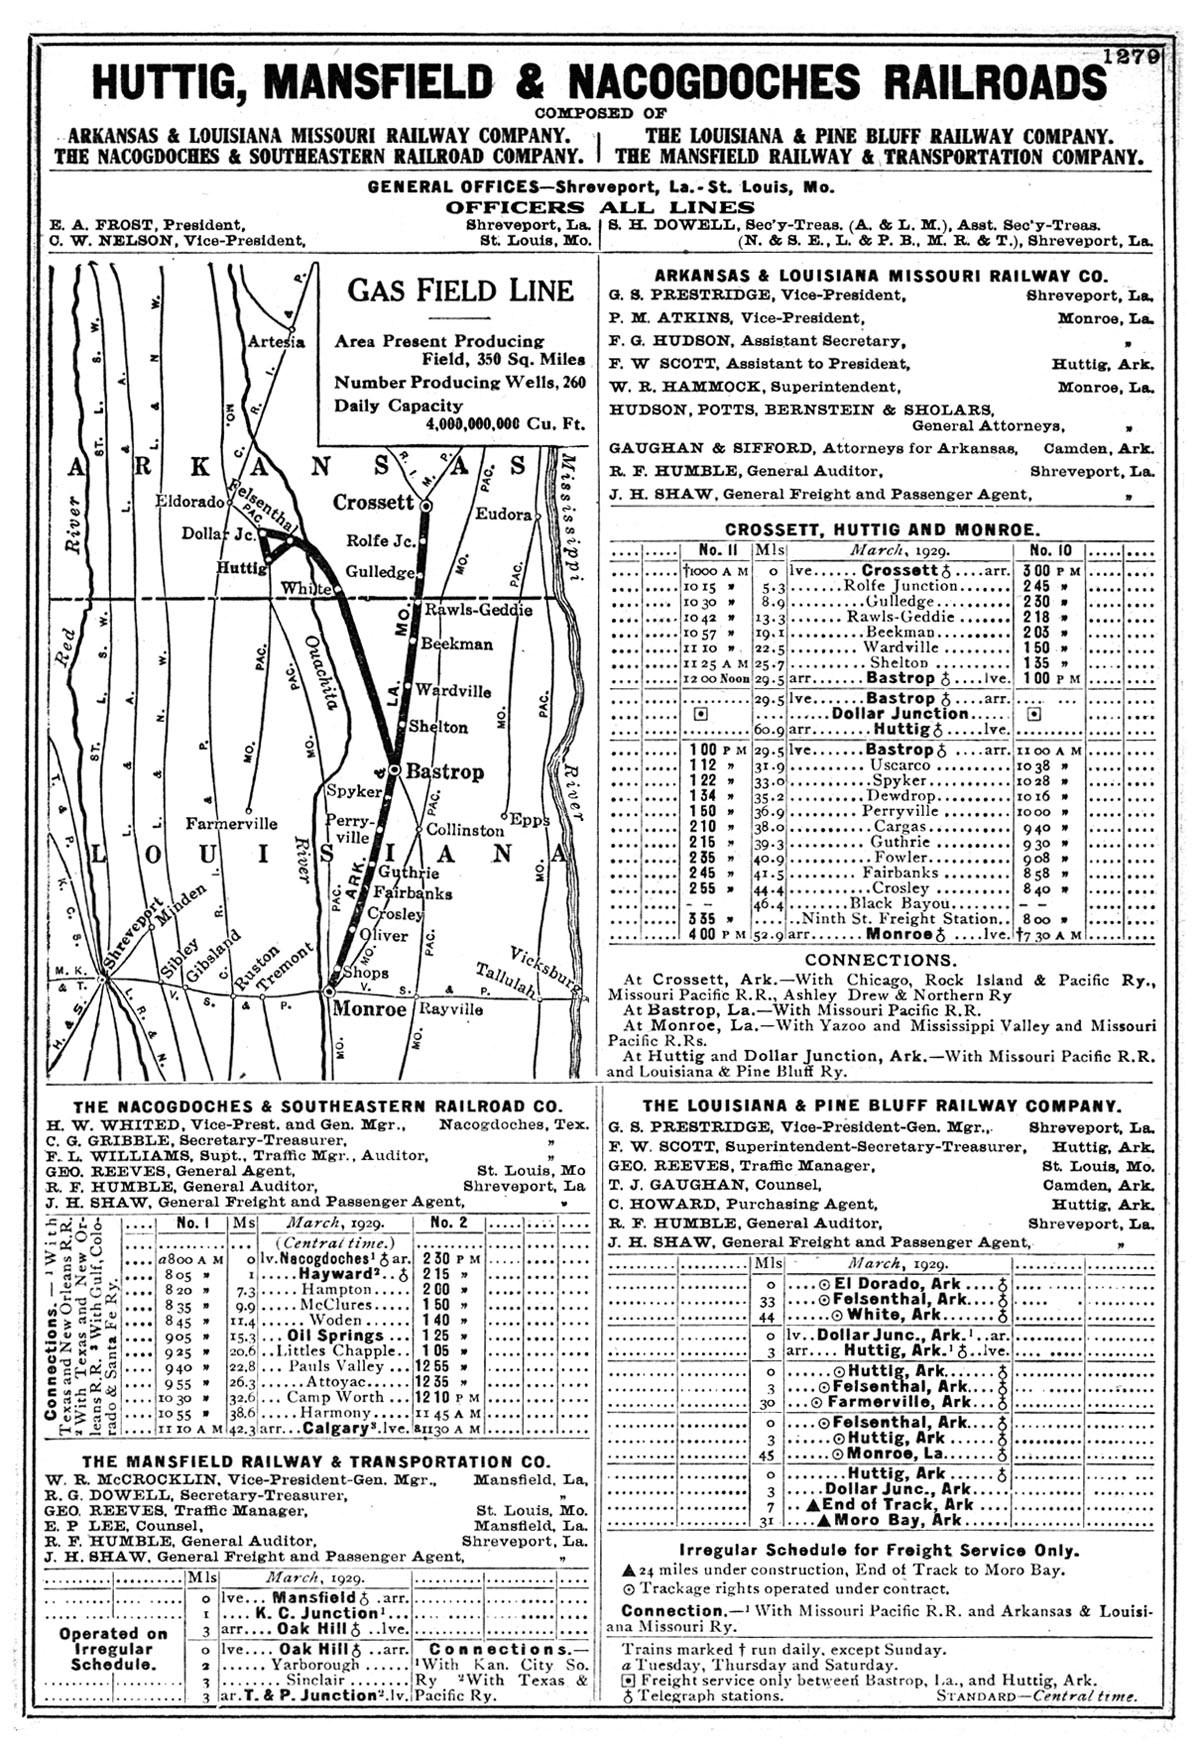 Arkansas, Louisiana & Missouri Railway Company (La.), Timetable Map Showing Route and Schedule in 1929.